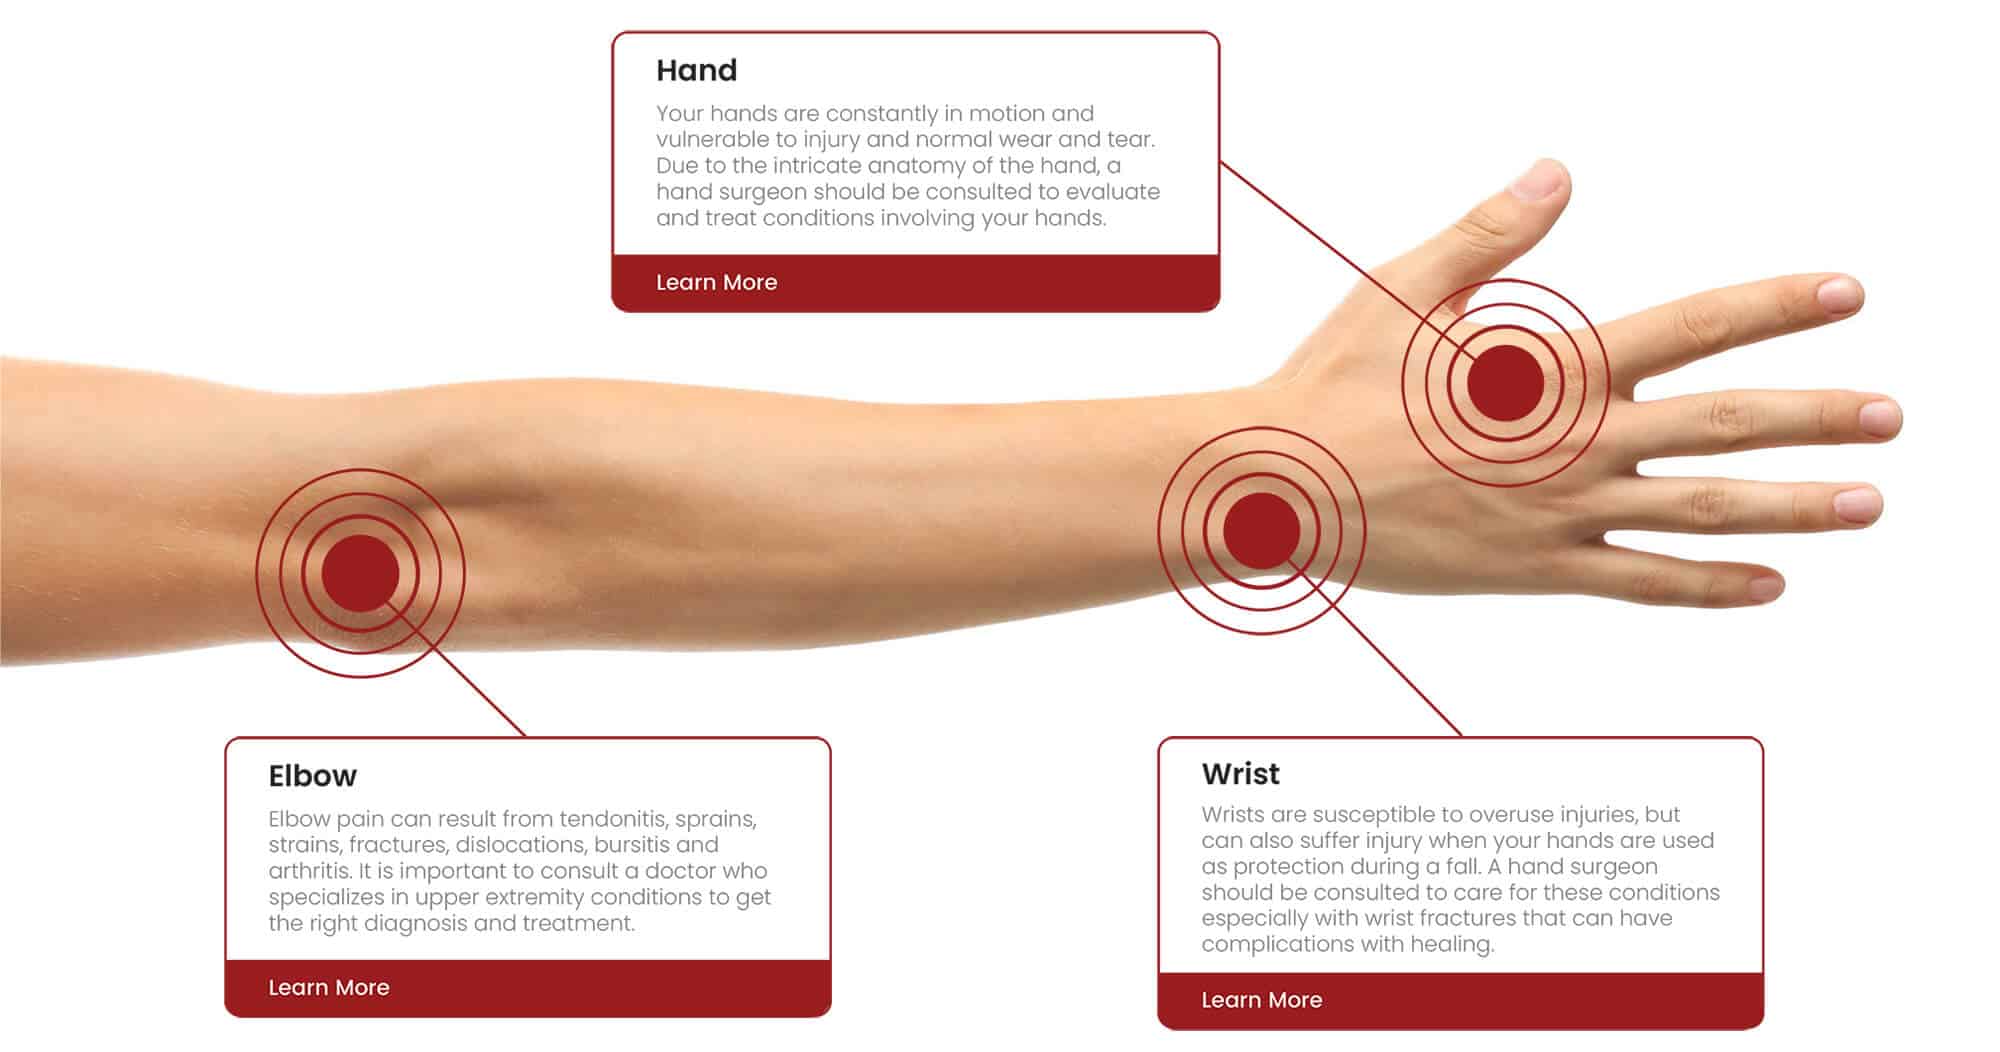 Infographic for the arm showing the hand, wrist, and elbow and how they may be affected by pain or injury